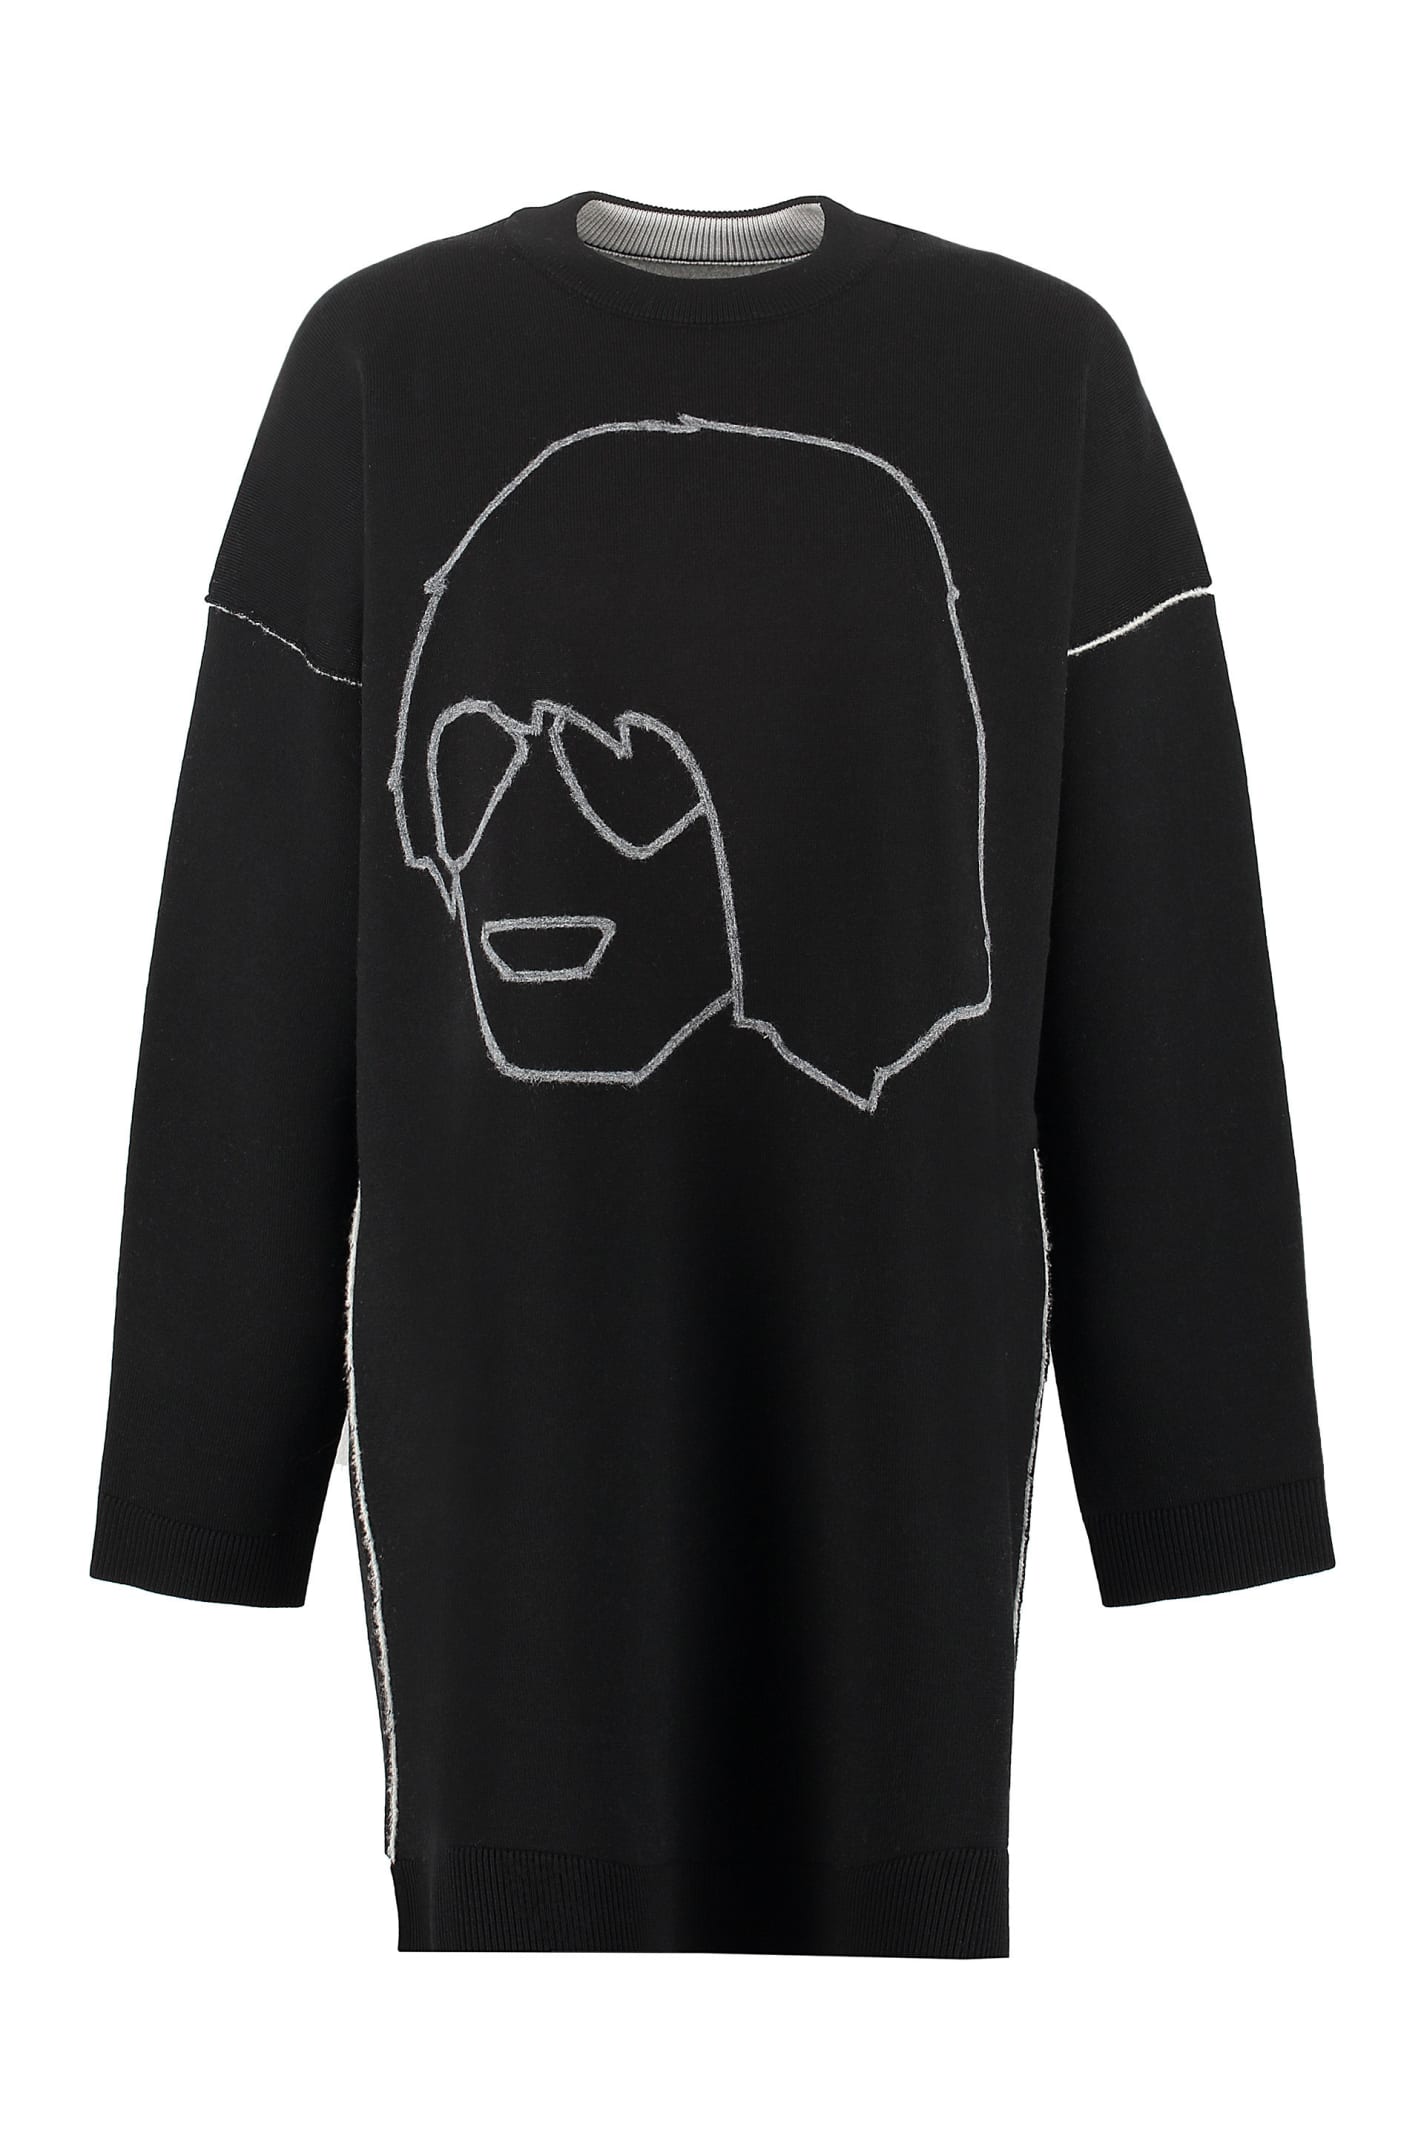 Kenzo Embroidered Oversize Sweater